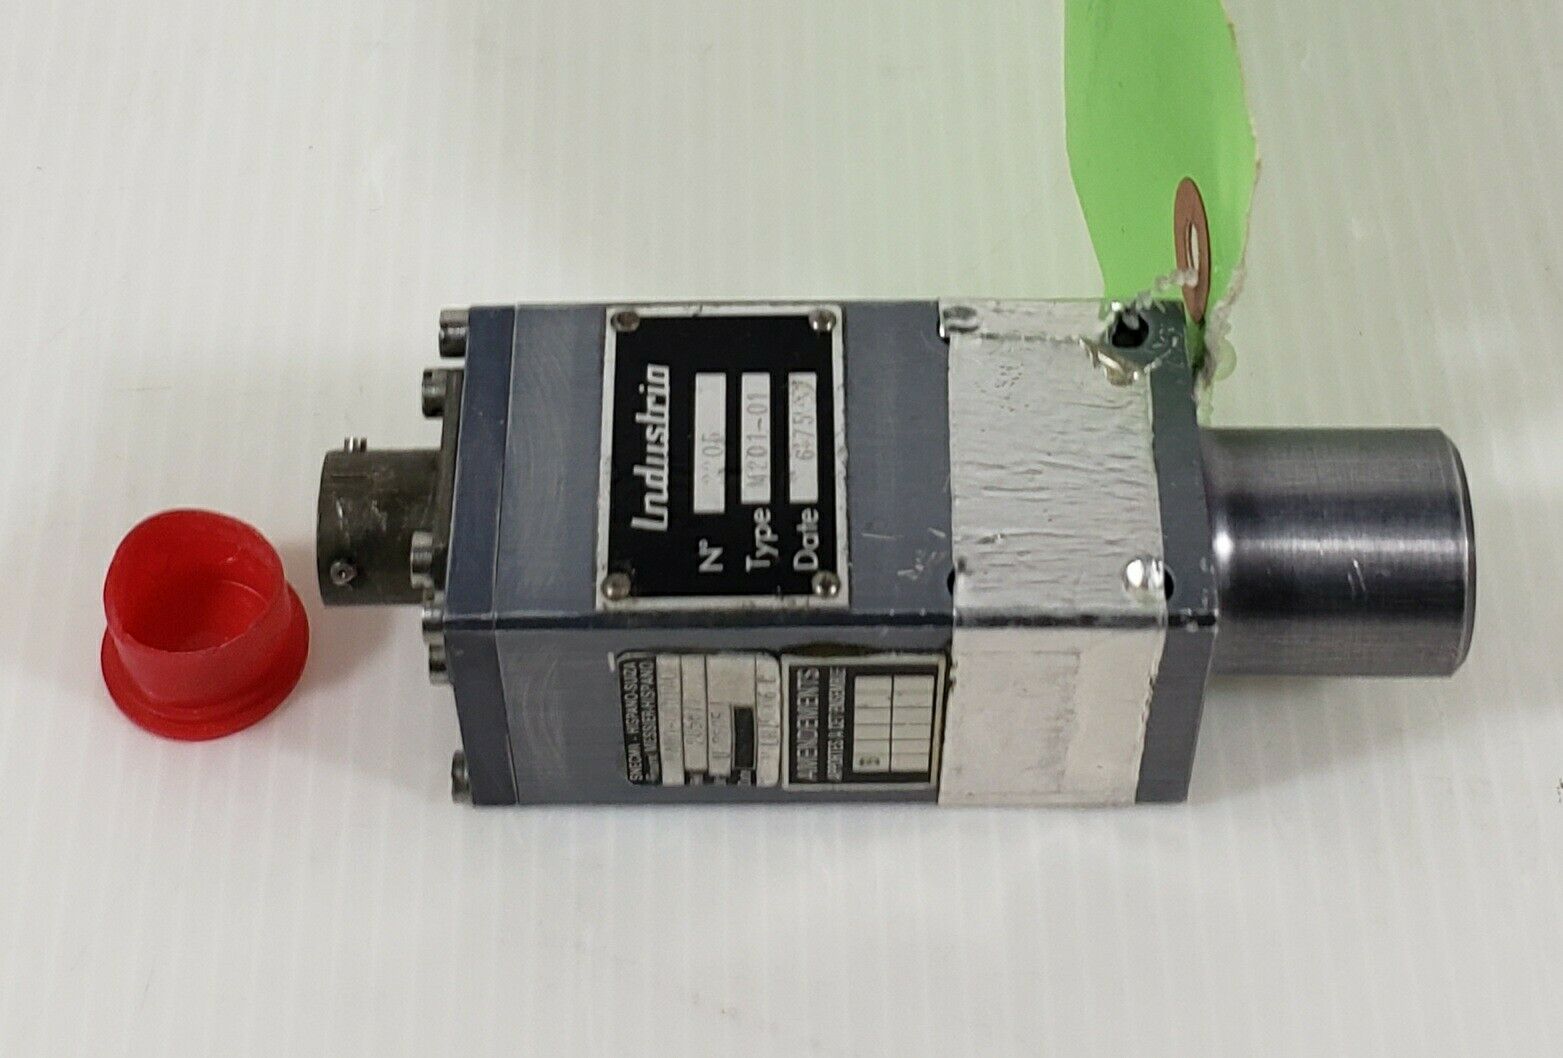 Industrio Absolute Pressure Switch, PN 285677 Aviation, For Parts or Repair